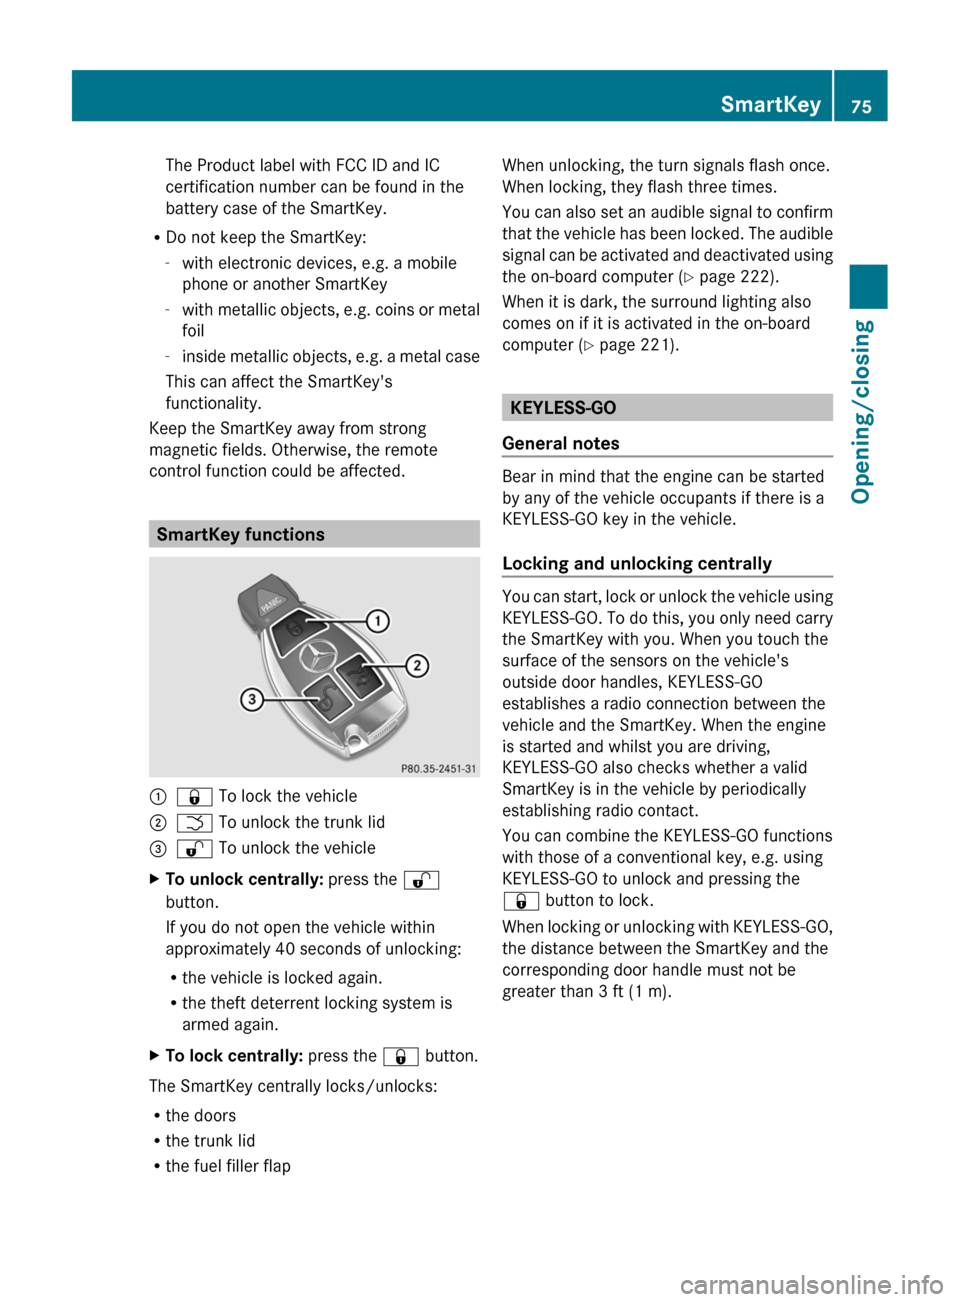 MERCEDES-BENZ CLS-Class 2013 W218 User Guide The Product label with FCC ID and IC
certification number can be found in the
battery case of the SmartKey.
R Do not keep the SmartKey:
-with electronic devices, e.g. a mobile
phone or another SmartKe